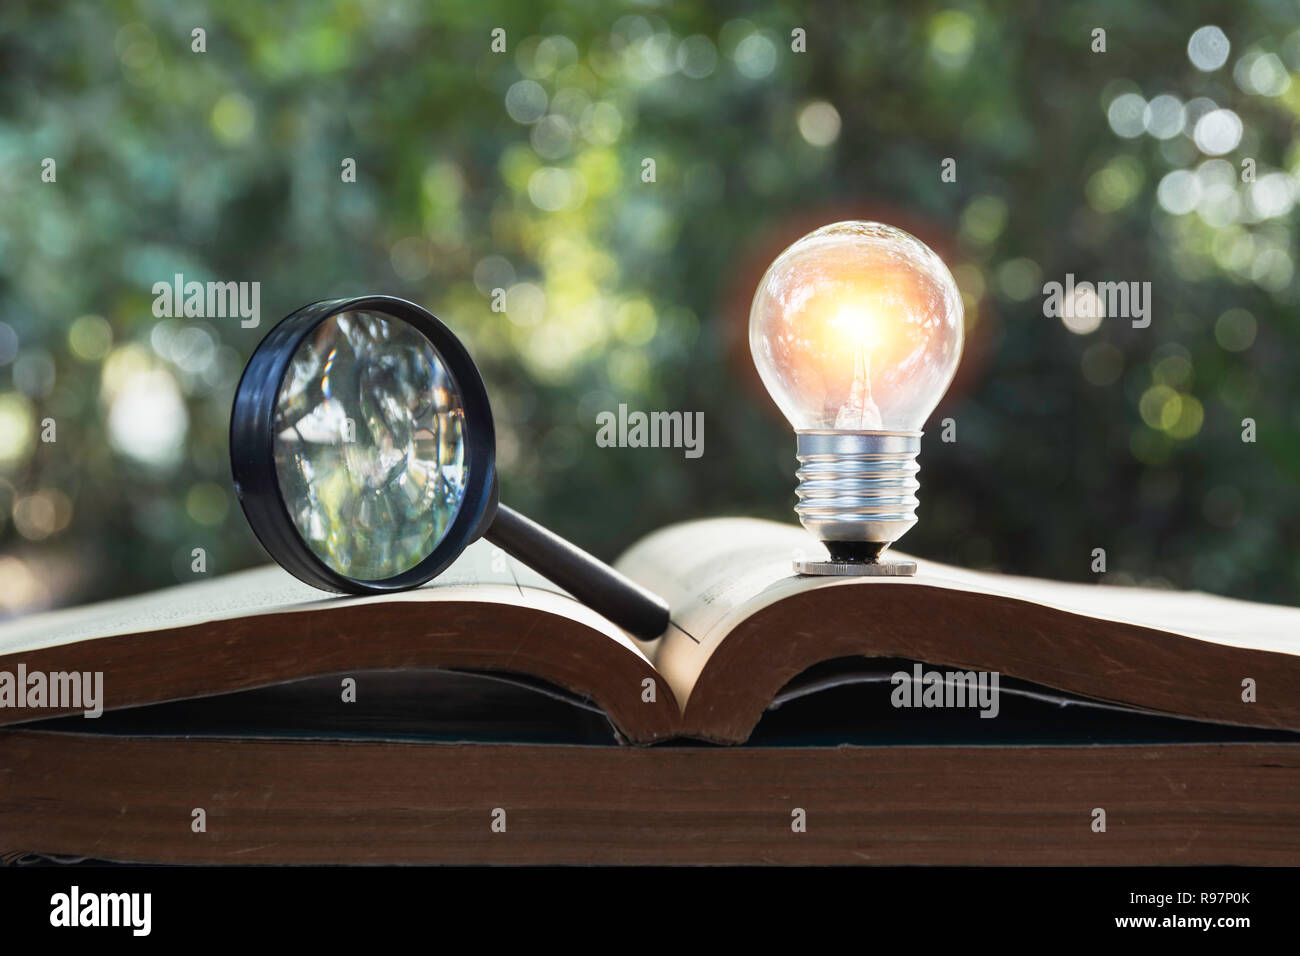 Light bulb and pile of book on table and copy space for insert text. Stock Photo